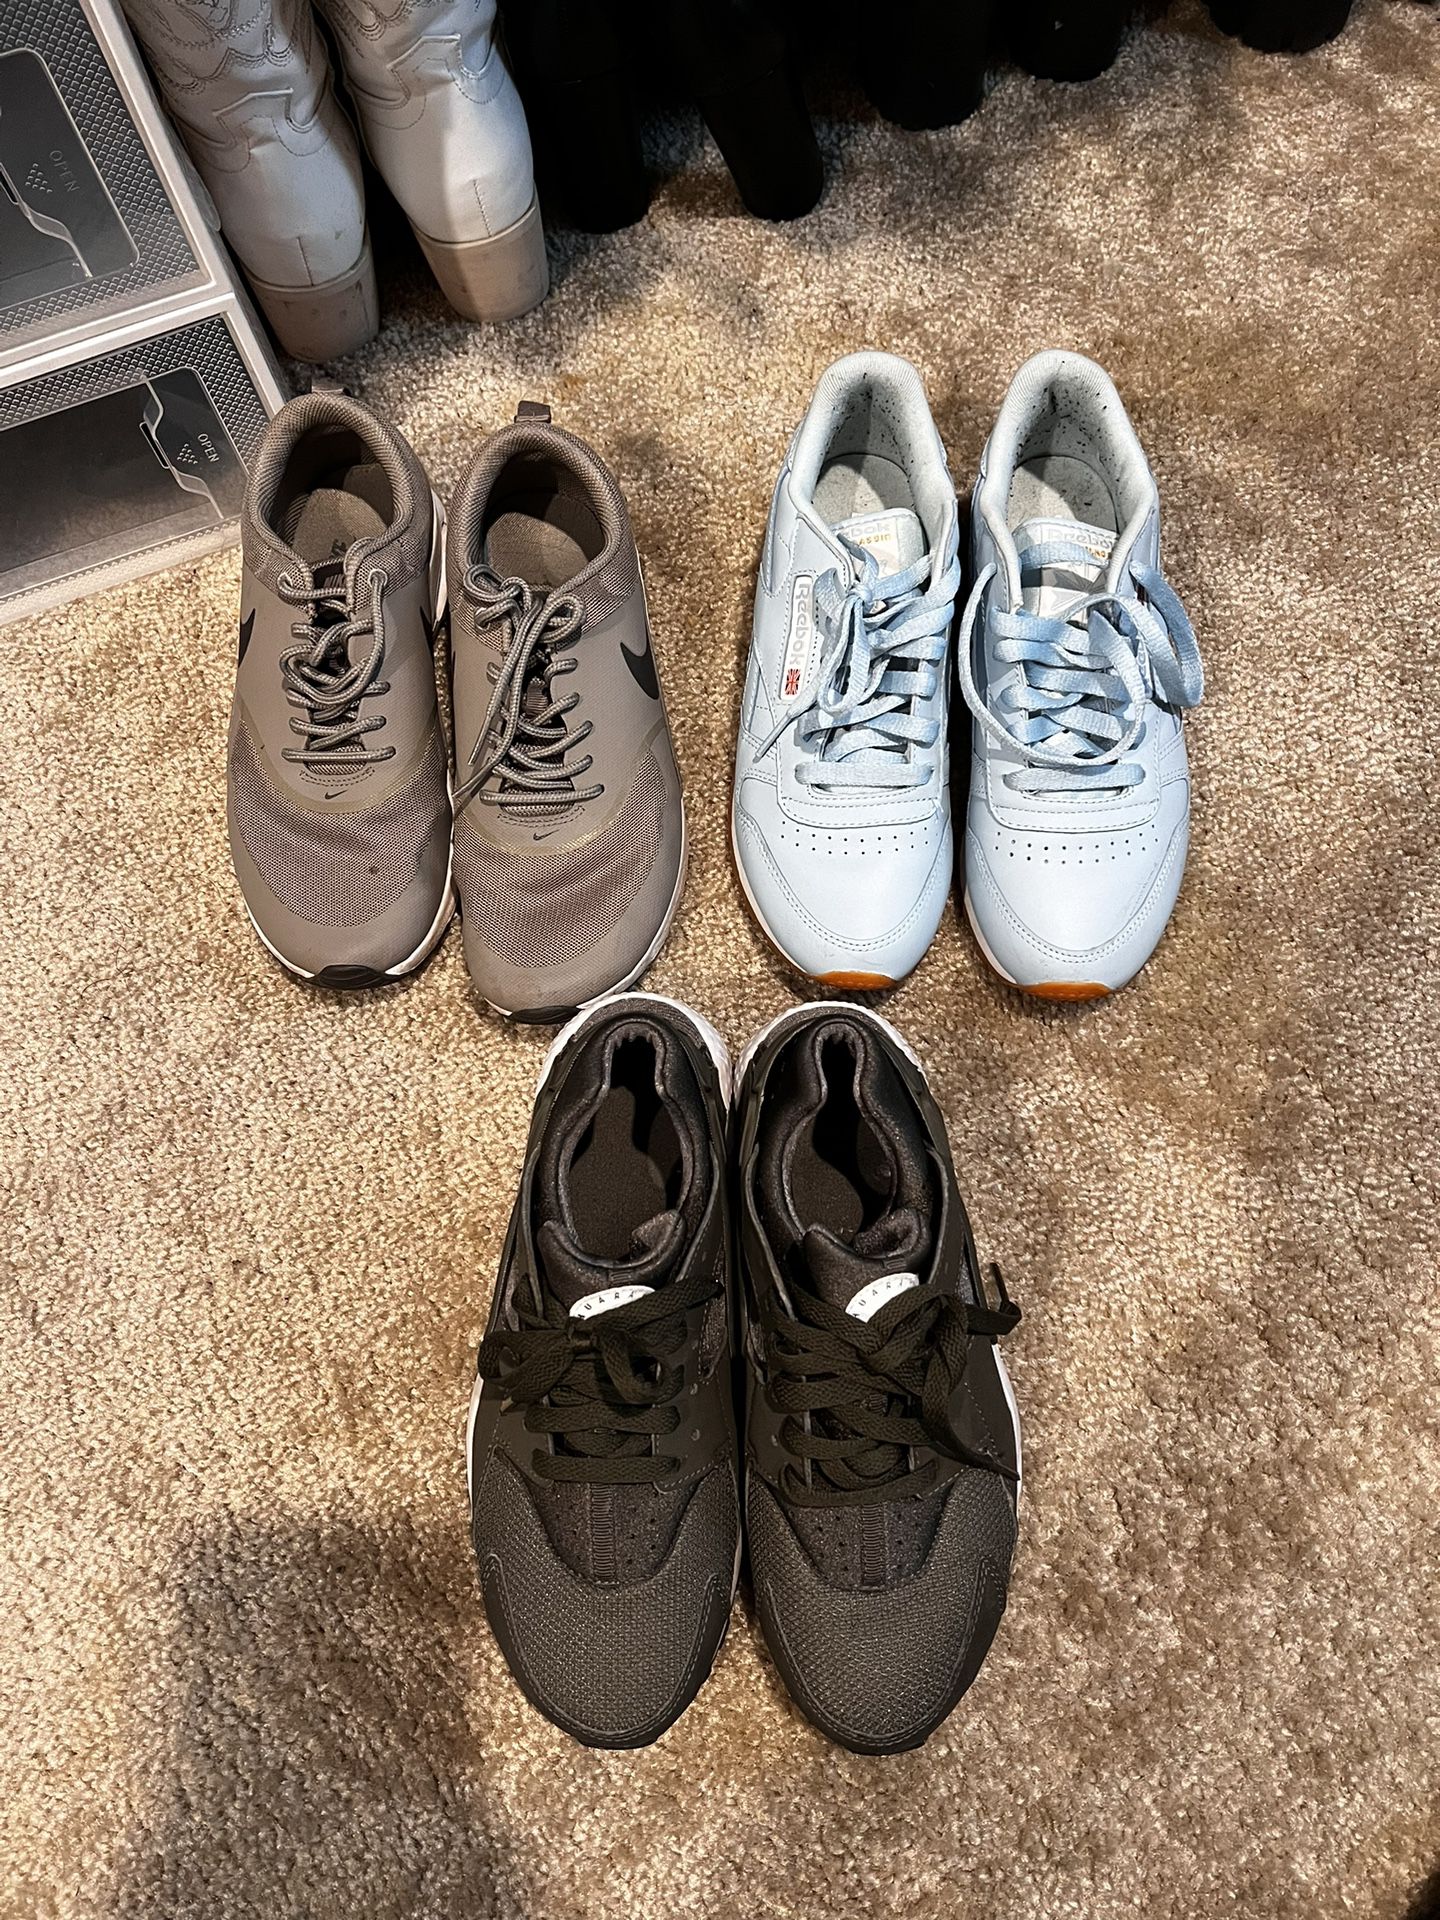 Nike And Reebok $60 for all 3 